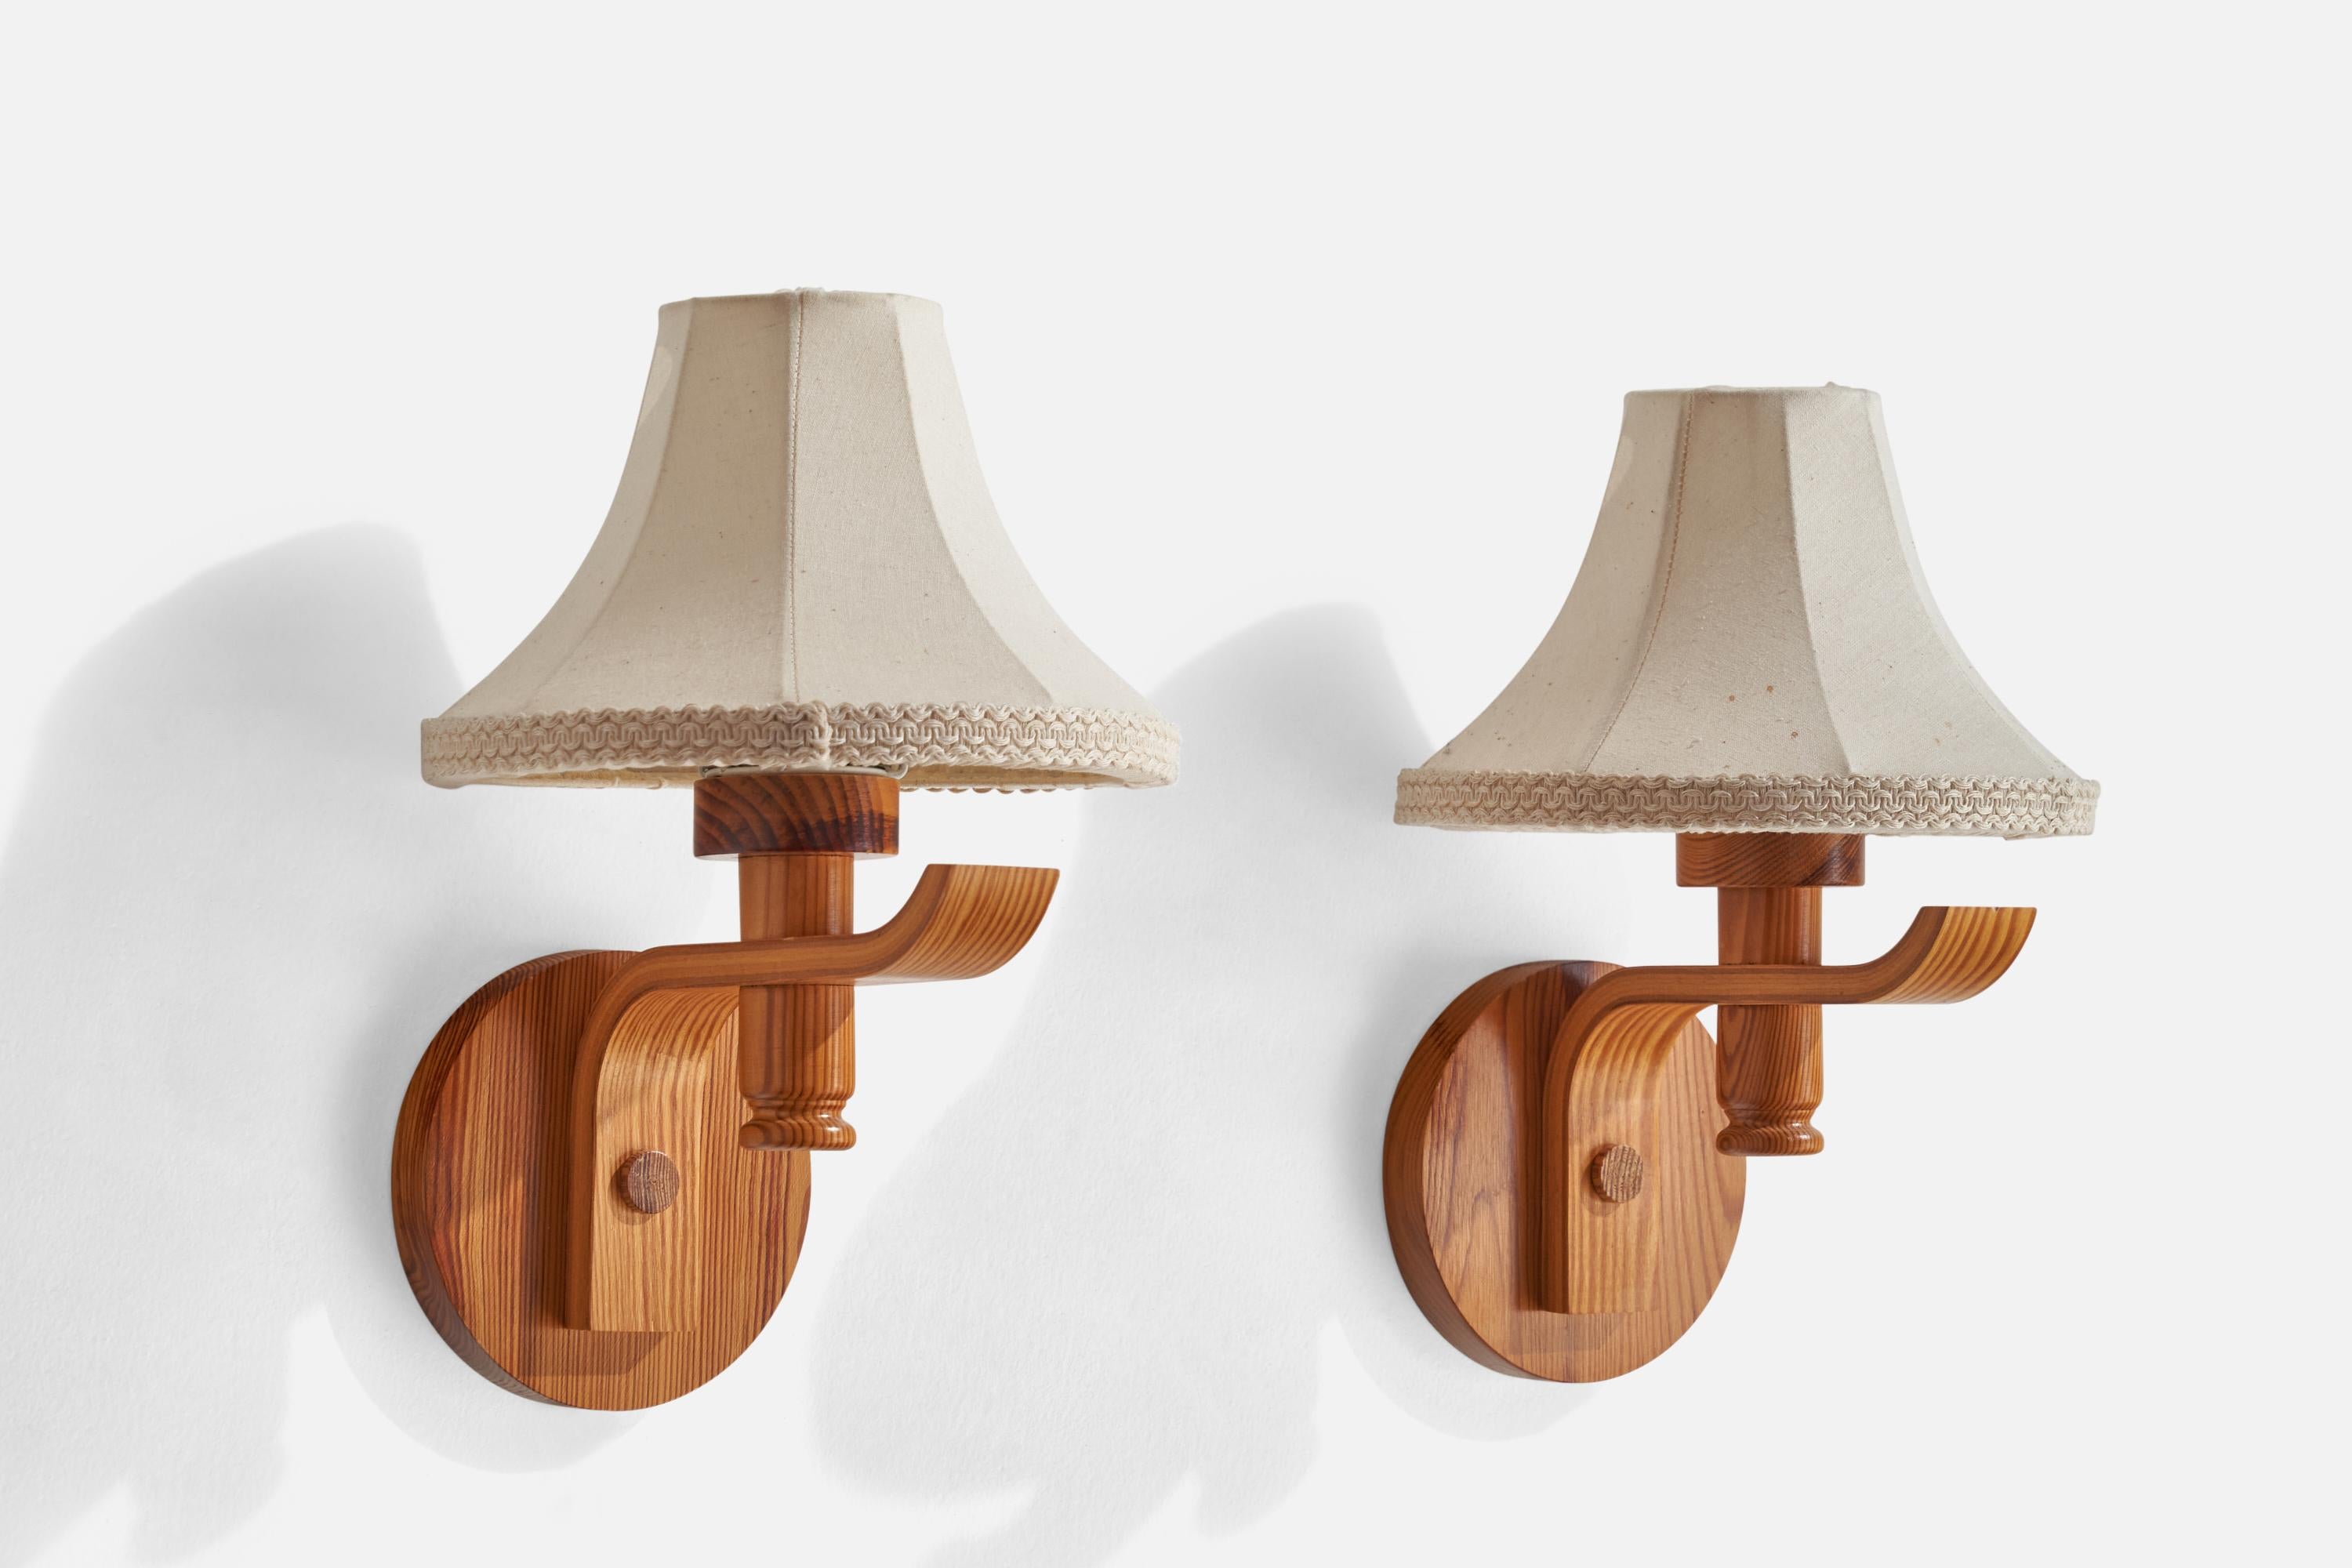 
A pair of pine and off-white fabric wall lights designed and produced in Sweden, 1970s.
Overall Dimensions (inches): 8.75” H x 5.5” W x 7.5” D
Stated dimensions include shade.
Bulb Specifications: E-26 Bulb
Number of Sockets: 2
All lighting will be